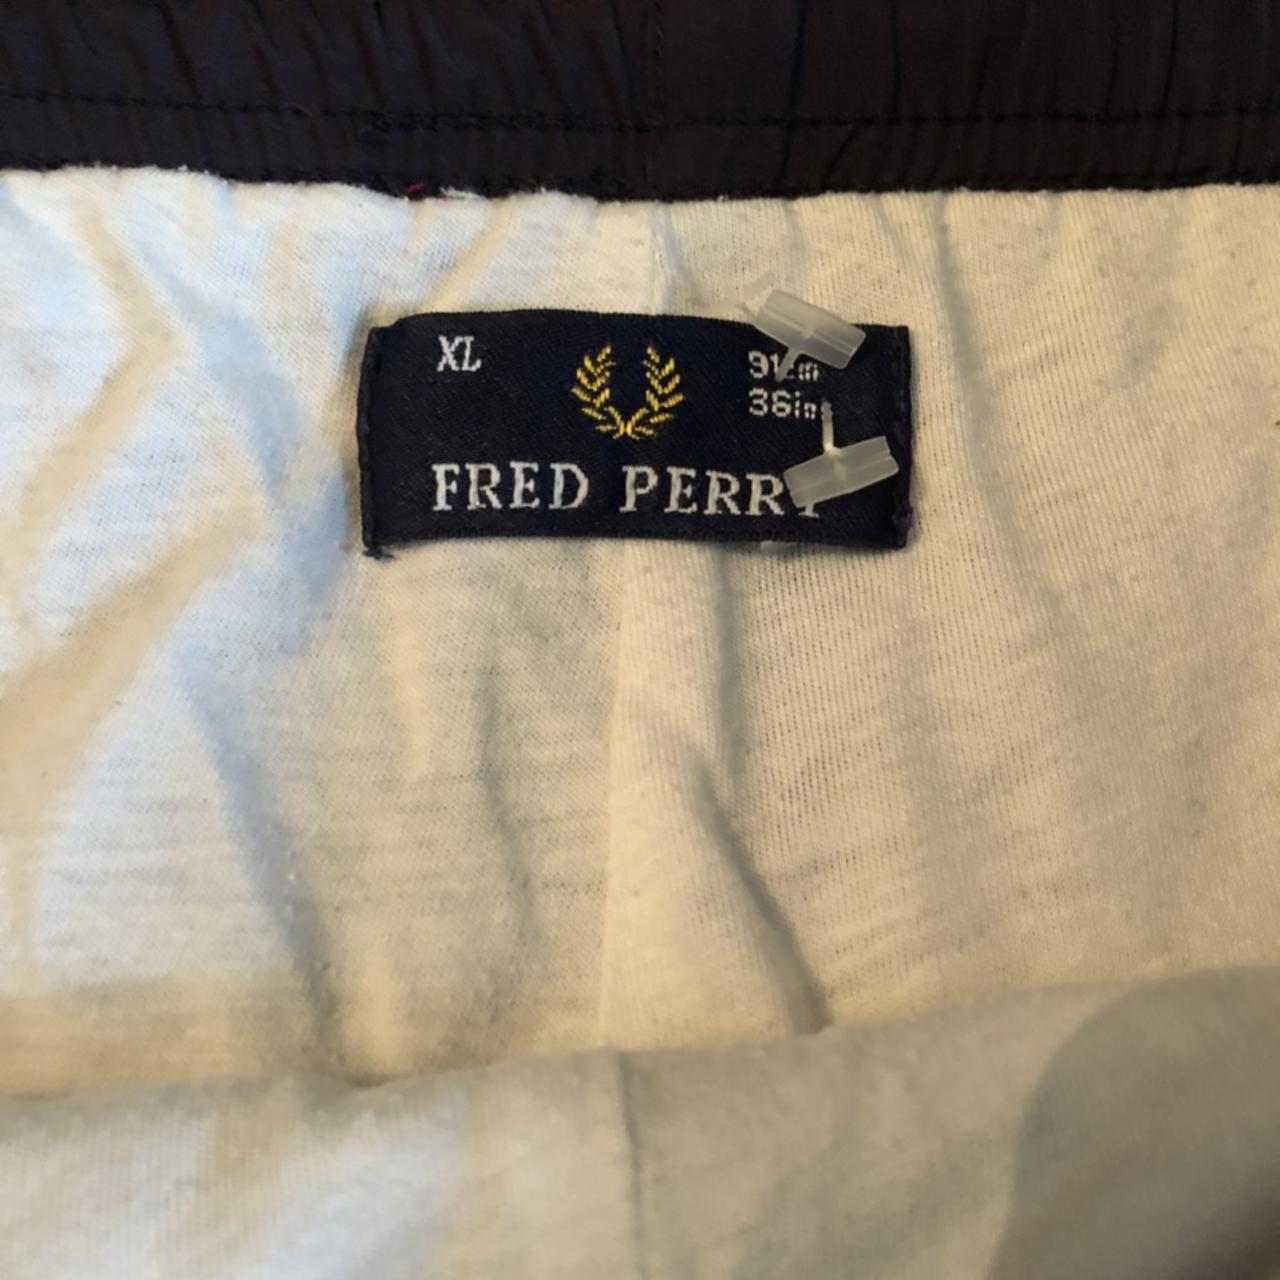 Fred perry trackie bottoms purple/burgandy 🔥 XL fits... - Depop